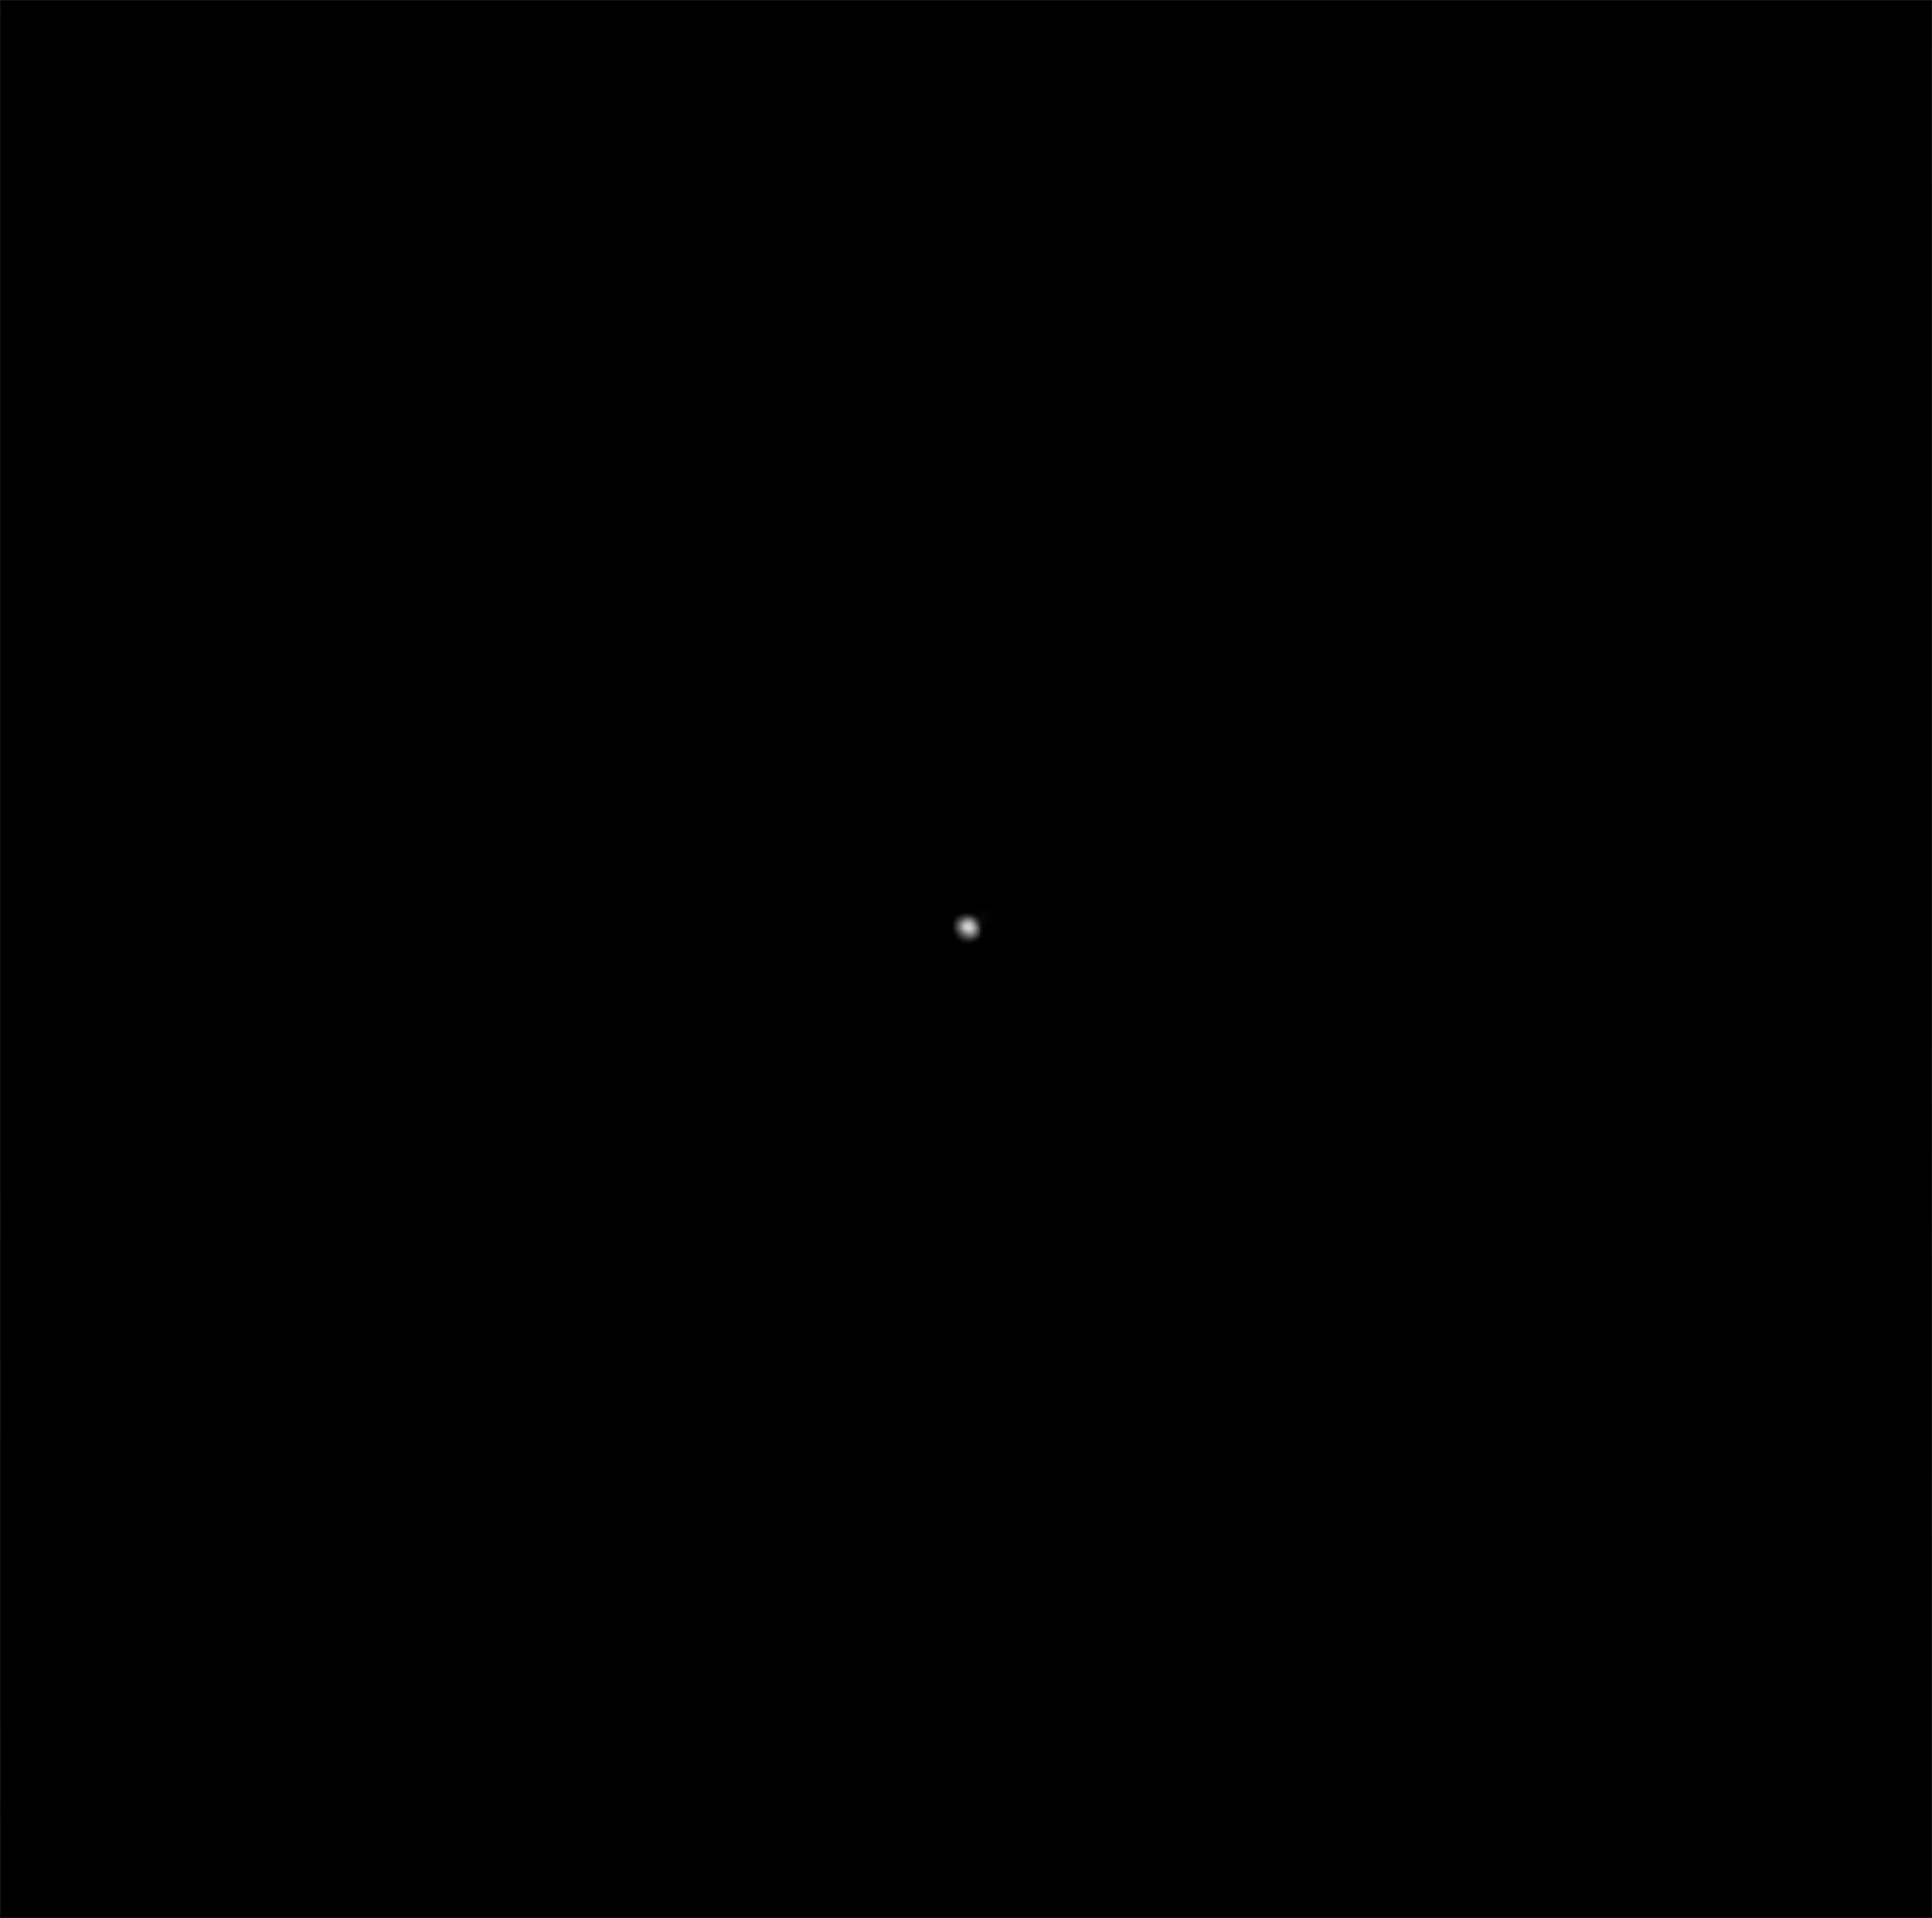 An image of the asteroid Didymos taken from the DART spacecraft.